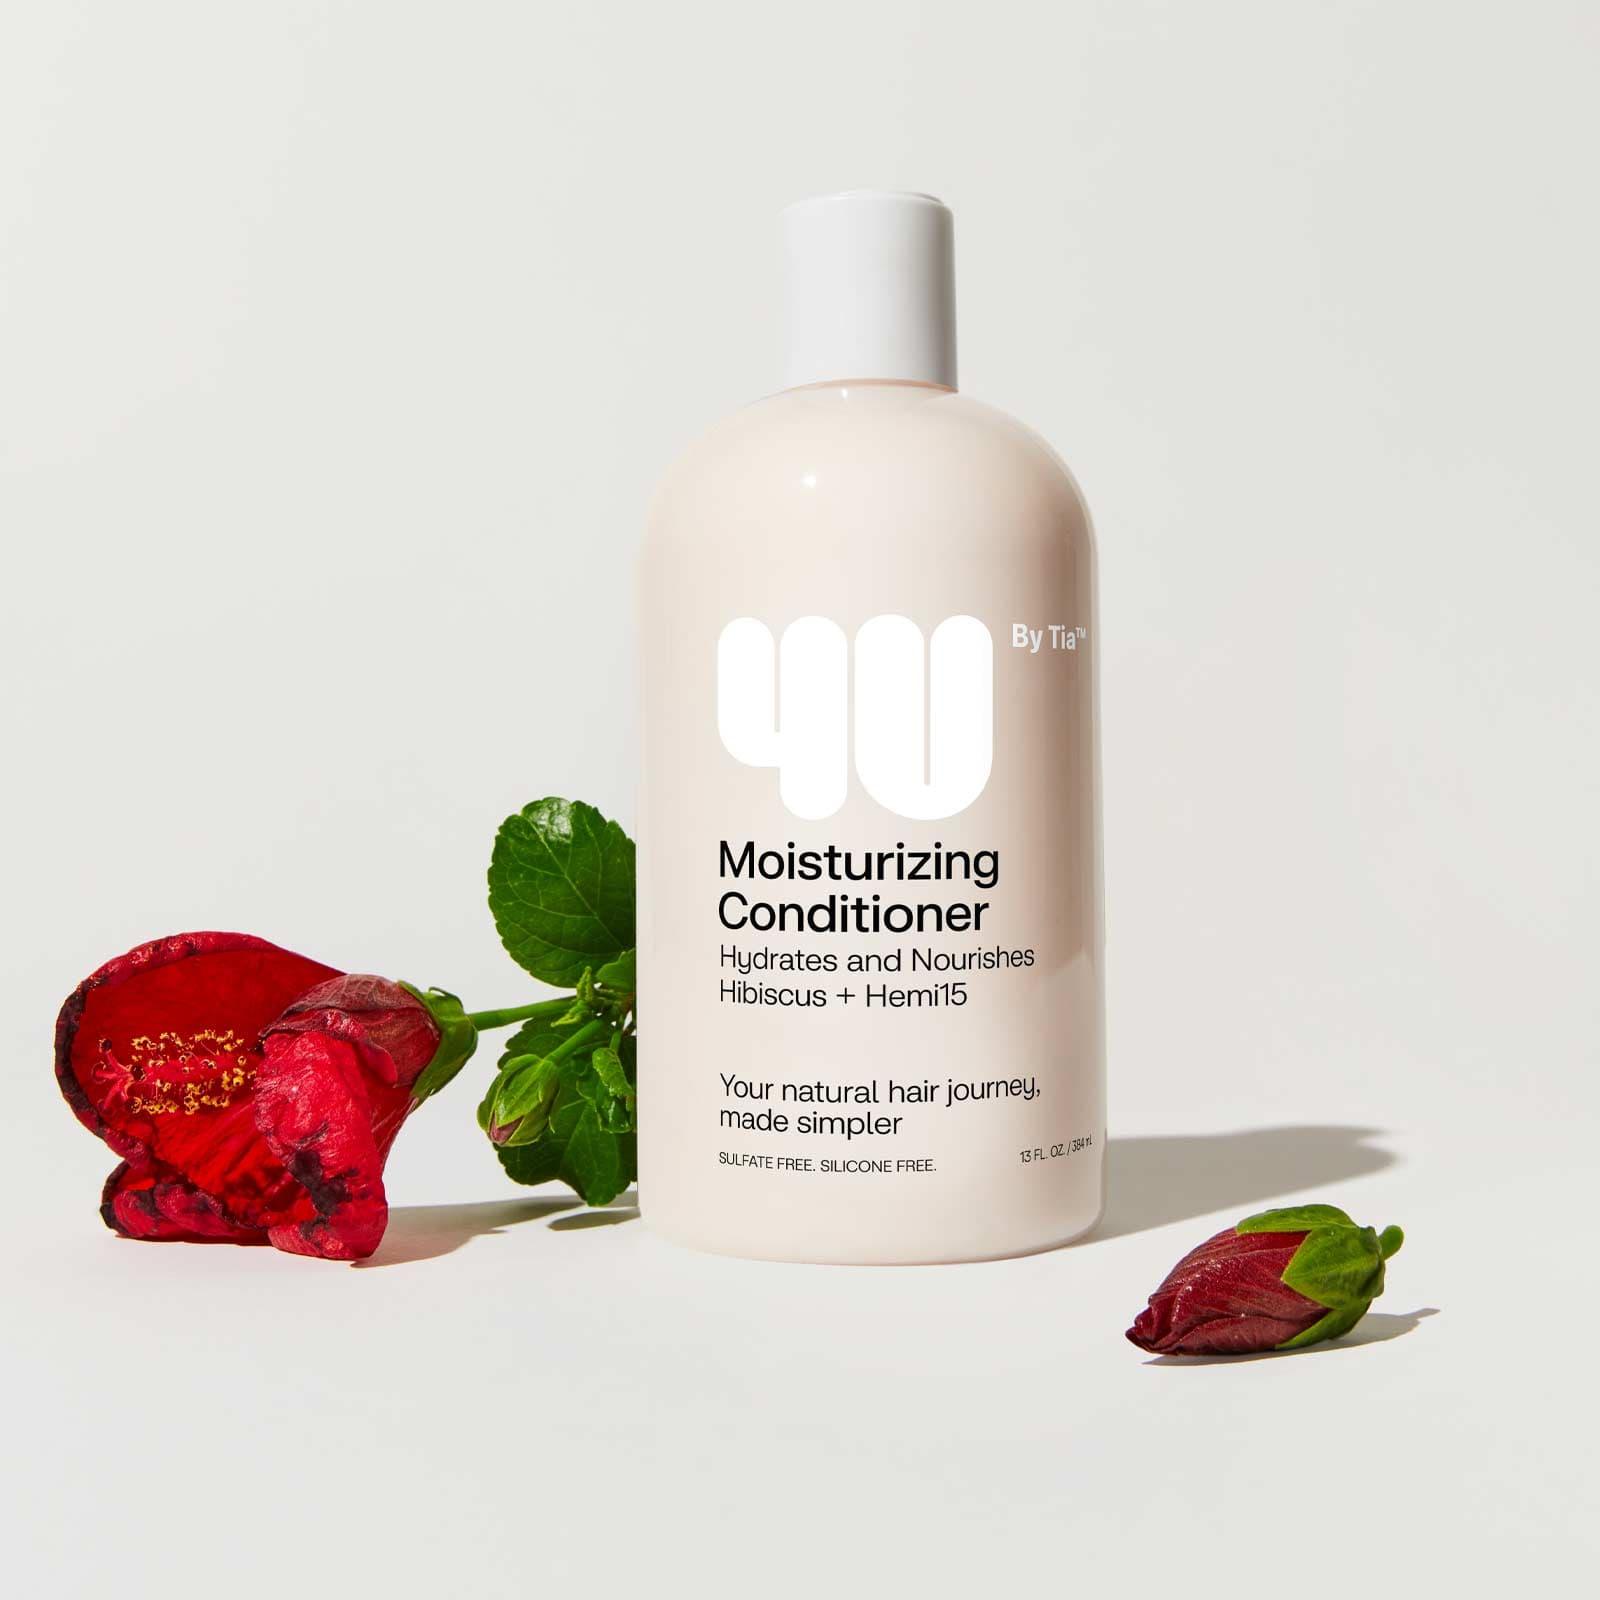 Moisturizing Conditioner with roses